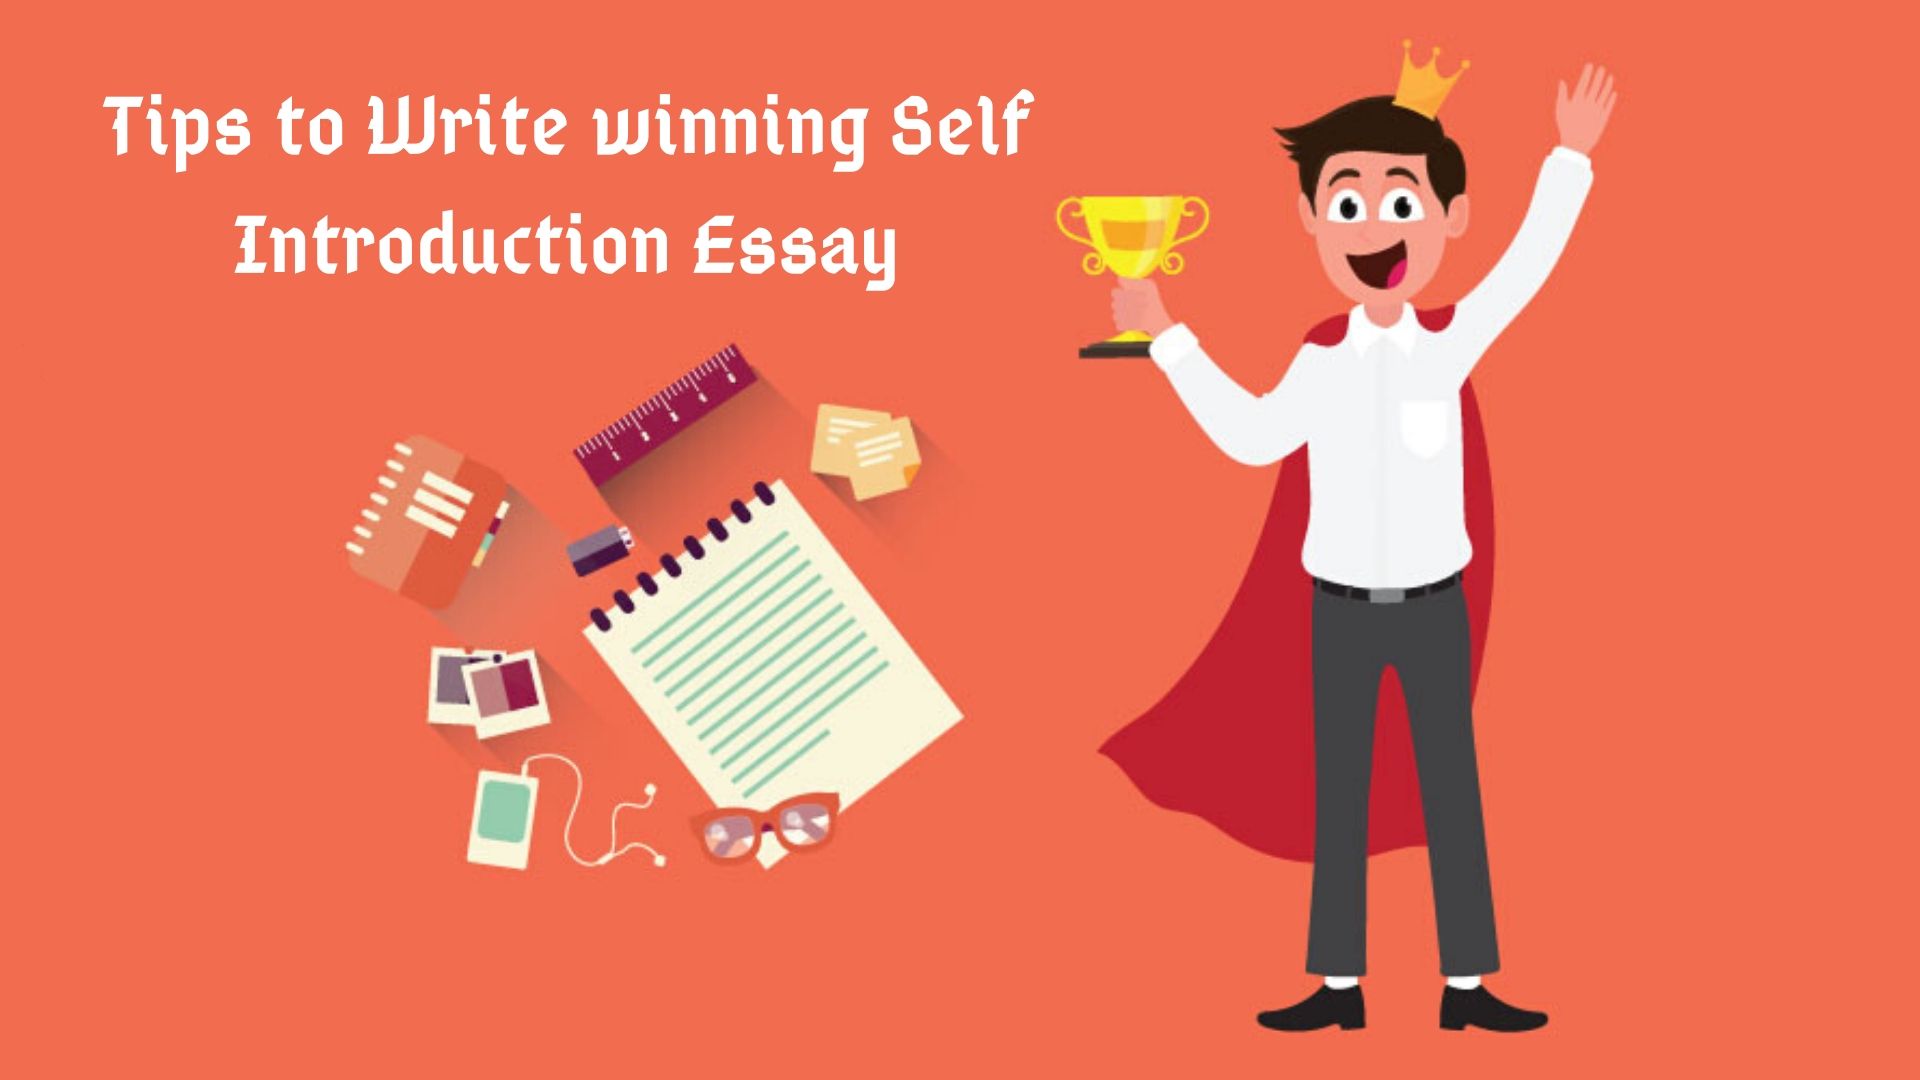 Tips to Write Winning Self Introduction Essay